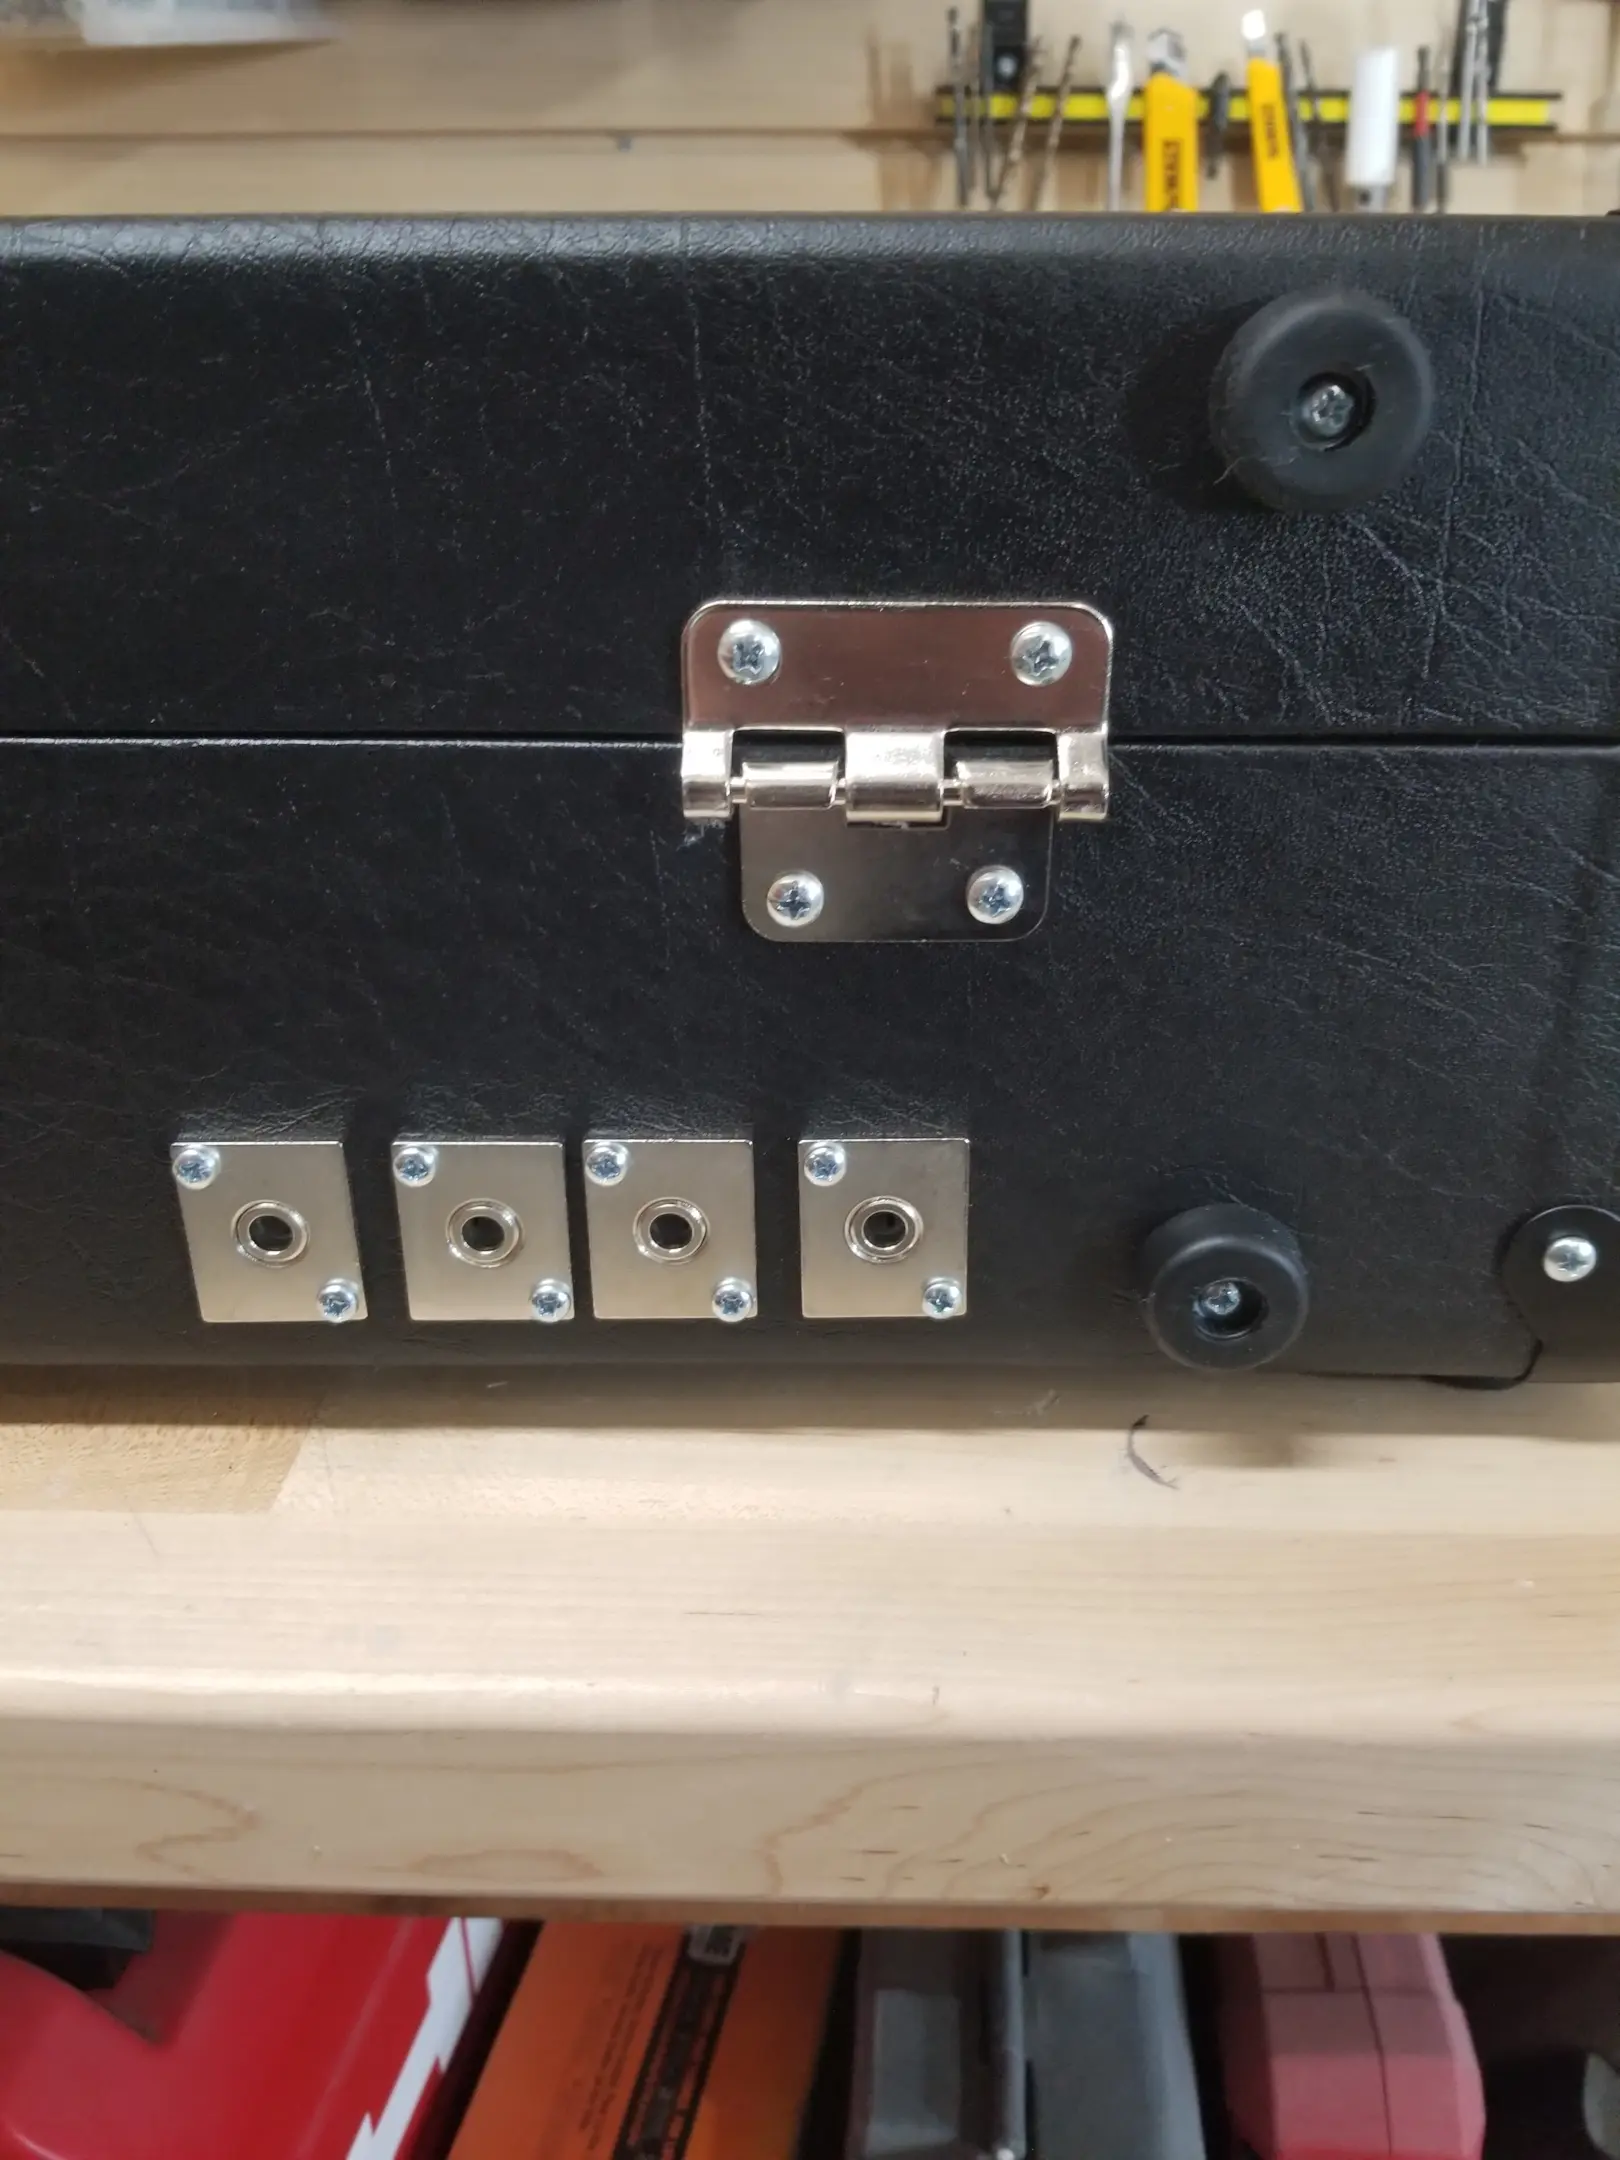 Built in audio input and output jacks
